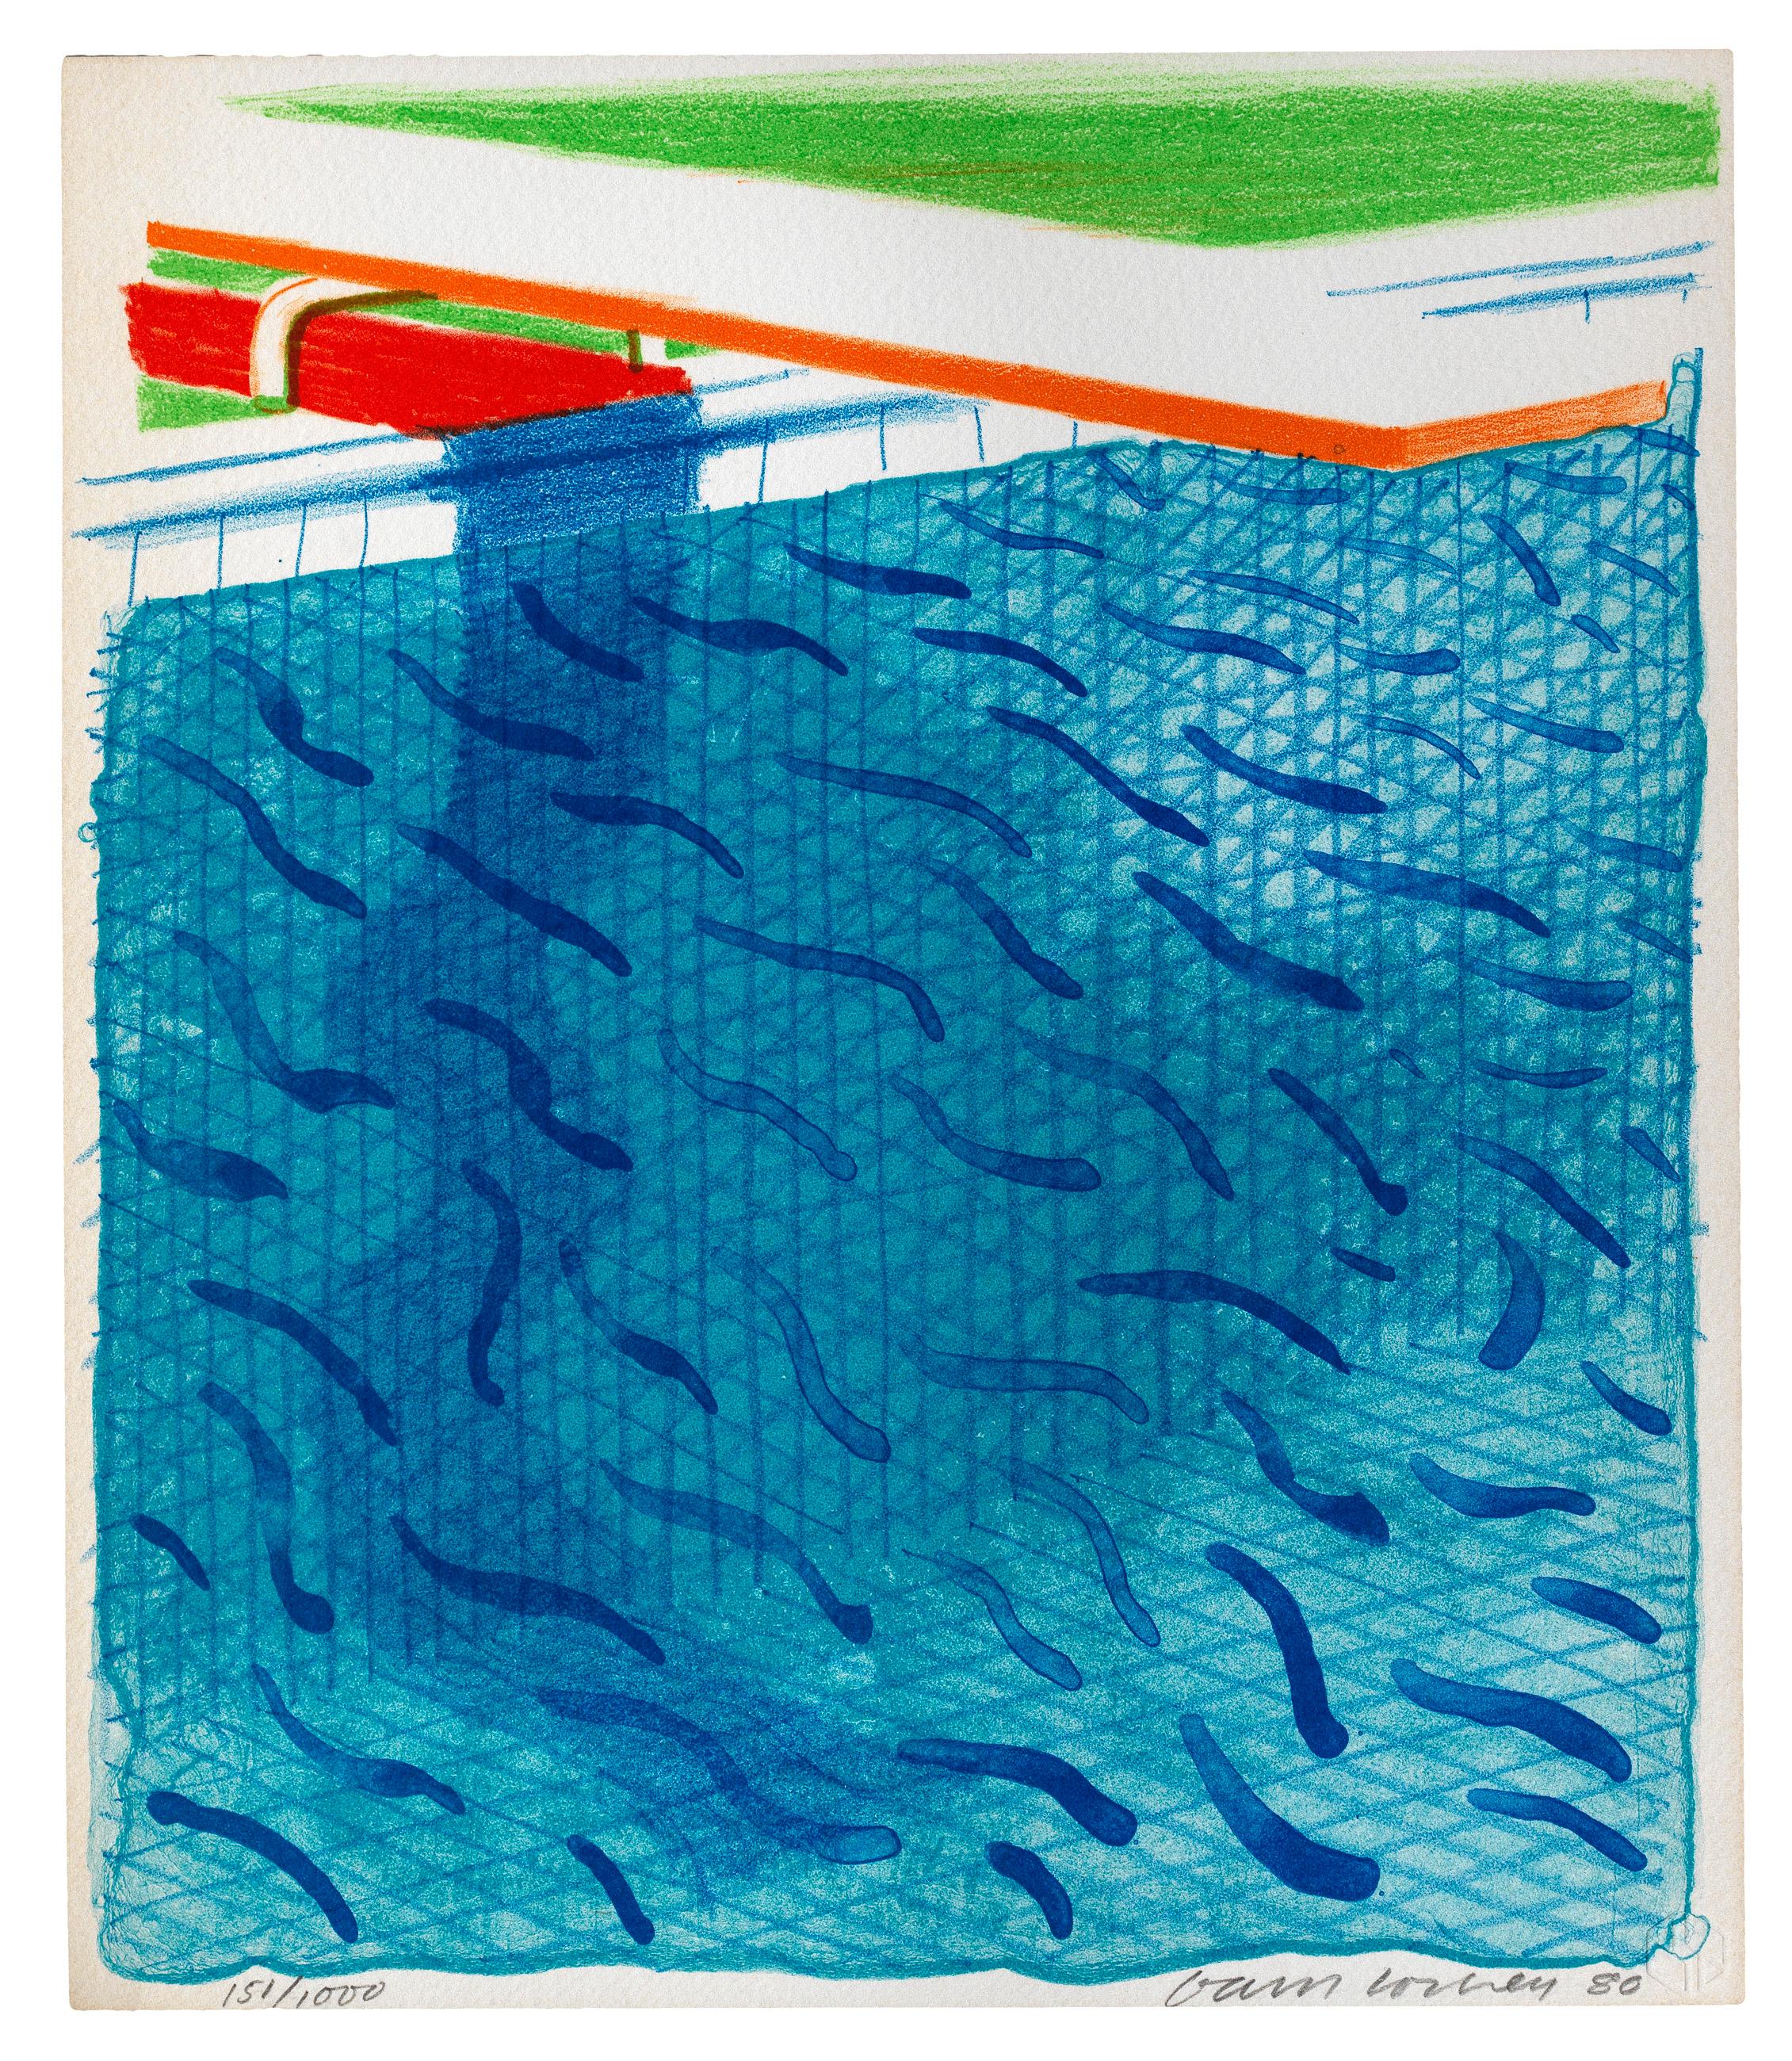 David Hockney Landscape Print - Pool Made with Paper and Blue Ink for Book